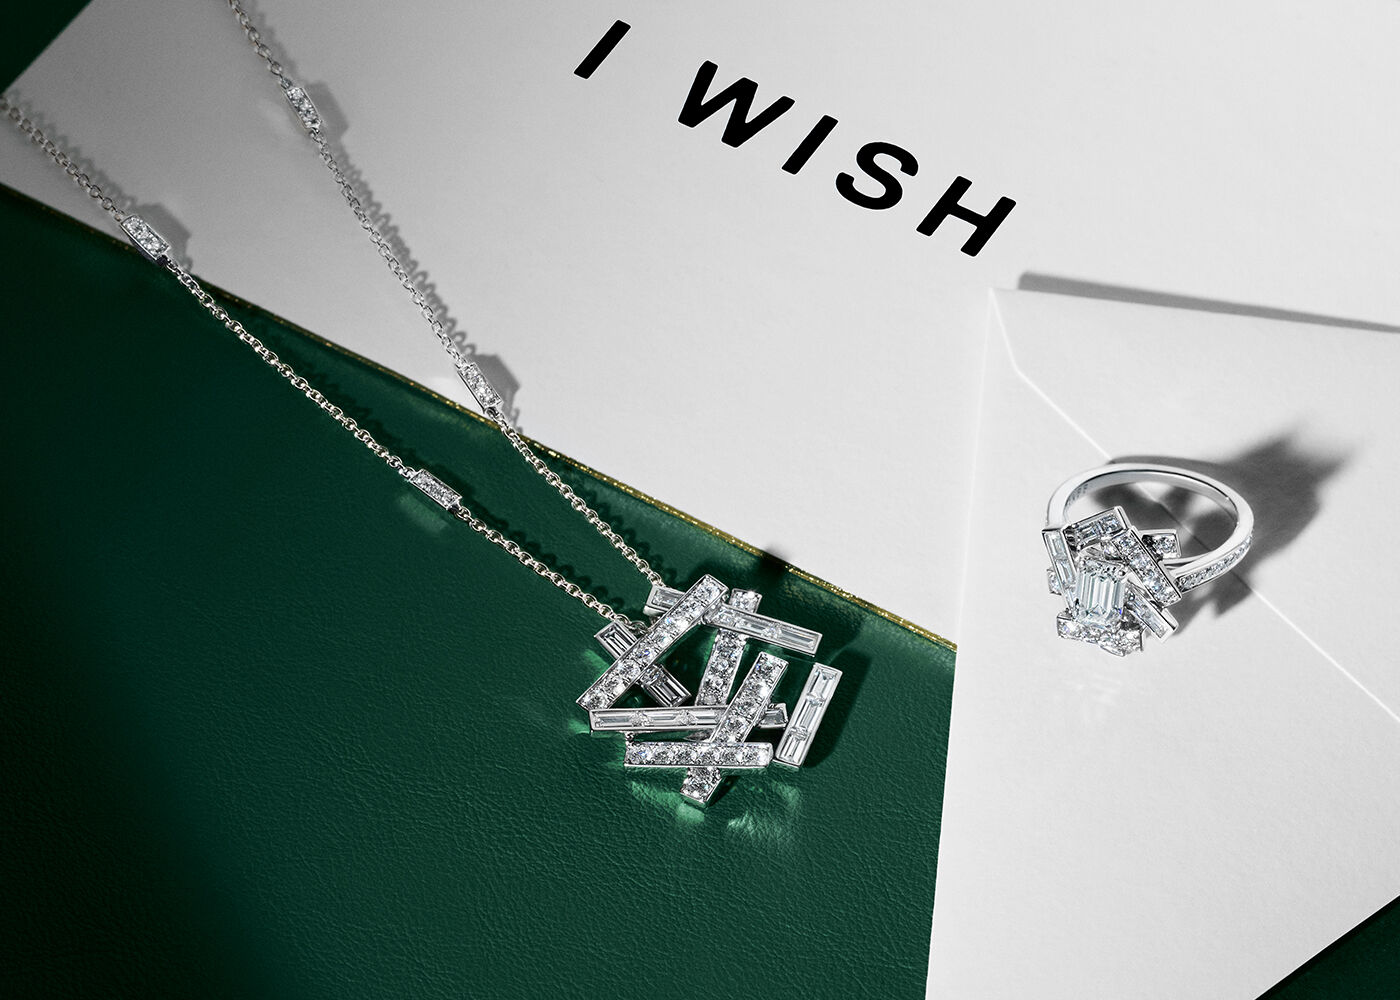 Gifts for her - Still life image of Graff Tilda's Bow earrings and pendant 